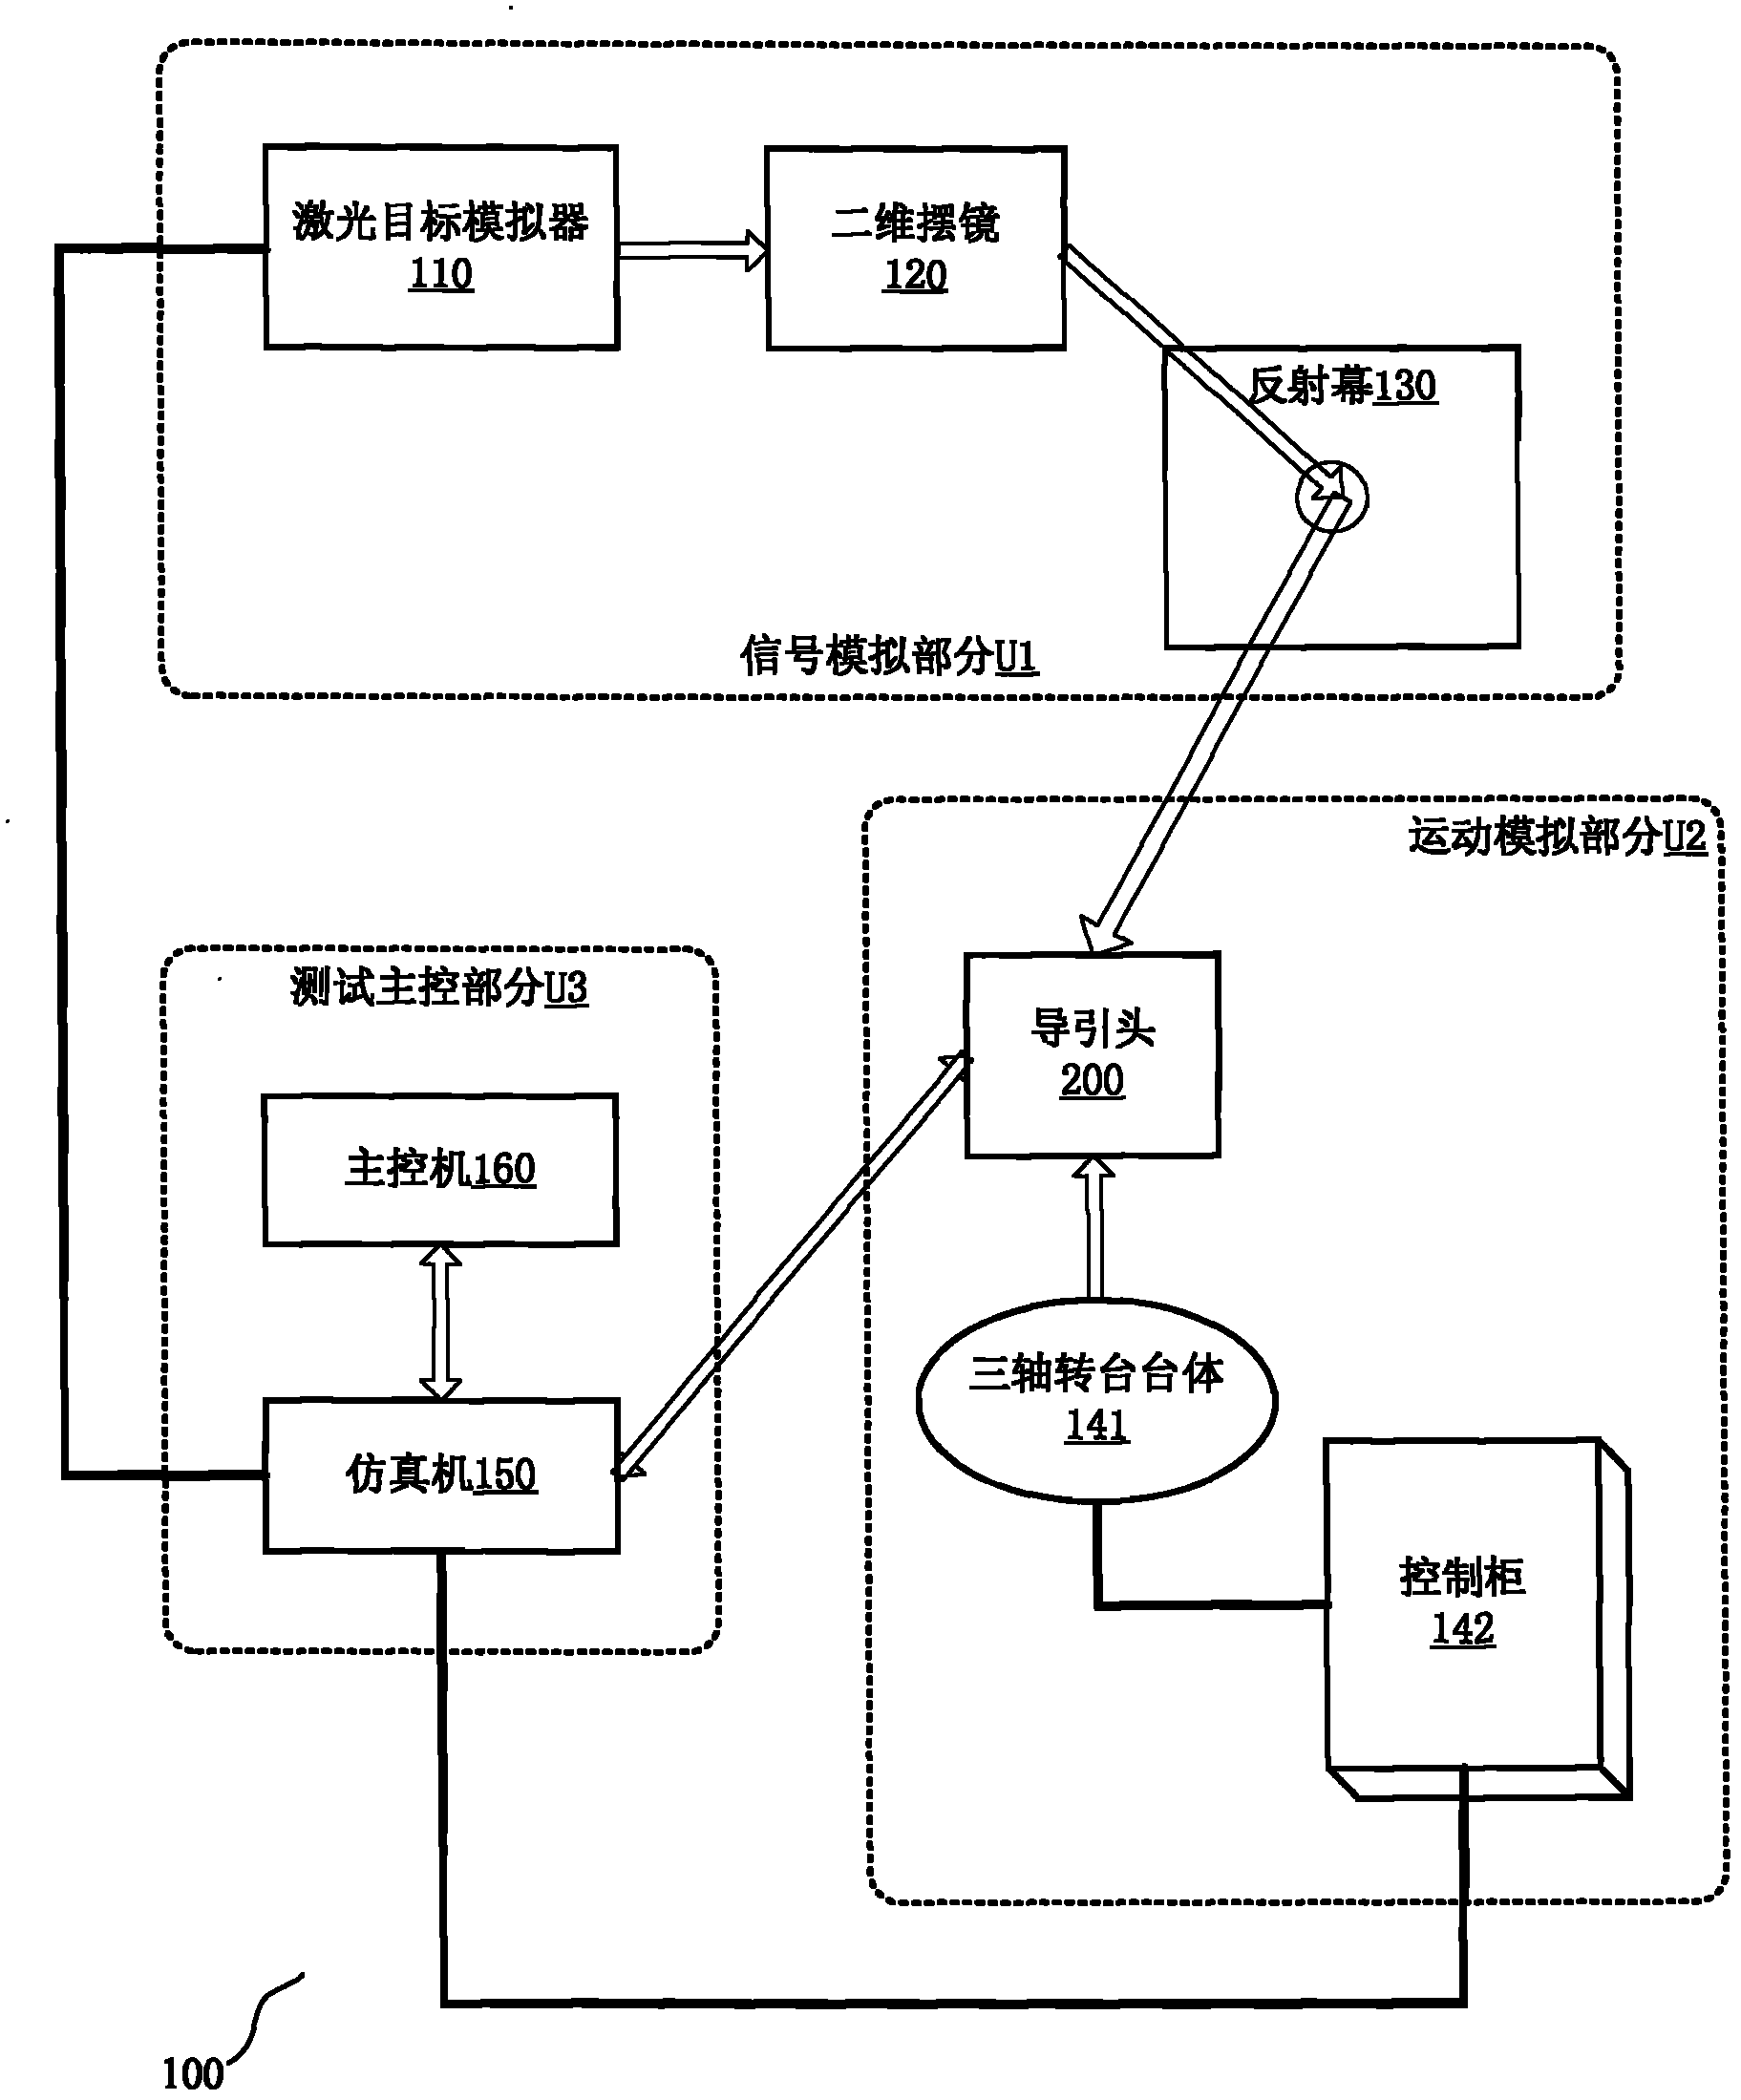 System for testing isolation of guide head of laser terminal guided projectile